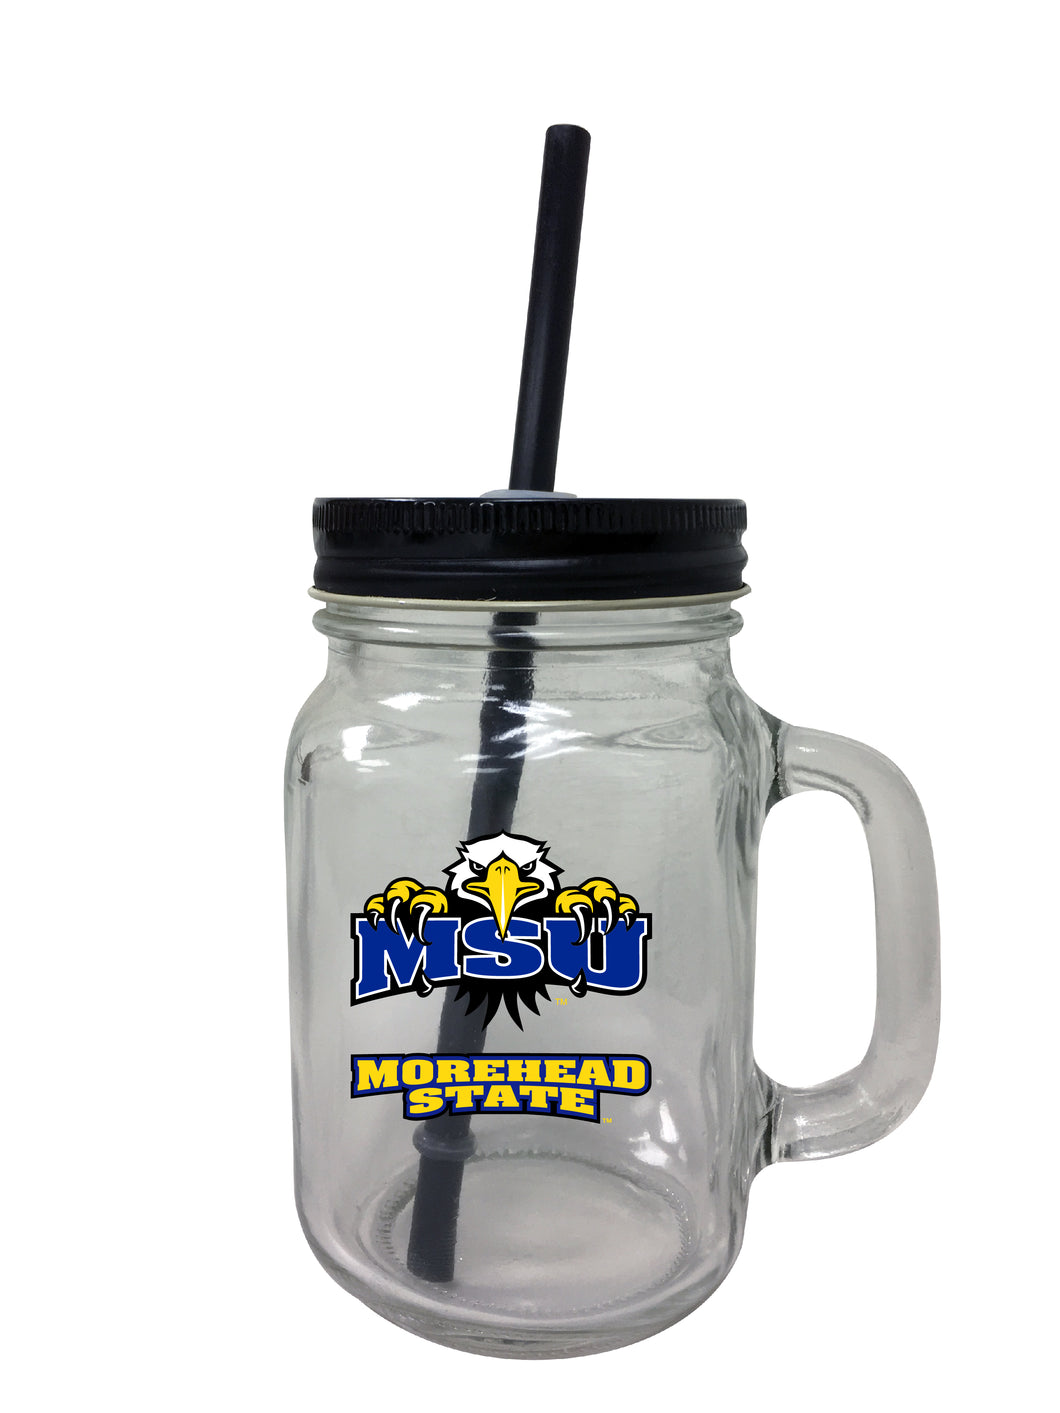 Morehead State University NCAA Iconic Mason Jar Glass - Officially Licensed Collegiate Drinkware with Lid and Straw 2-Pack